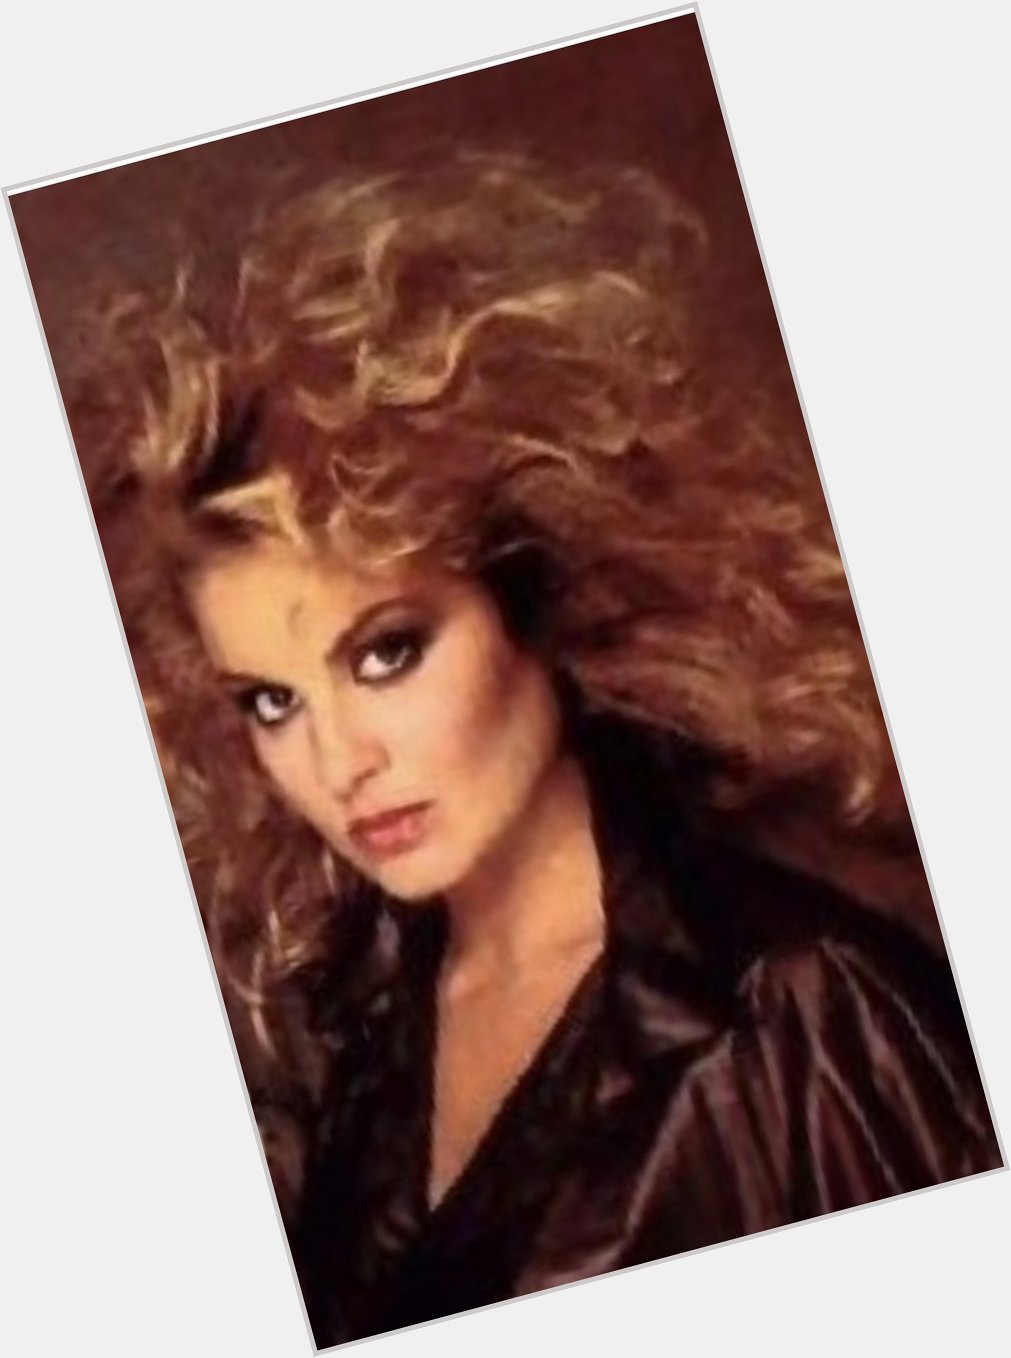 Wishing this legend & icon Jay Aston a very happy 61st birthday 